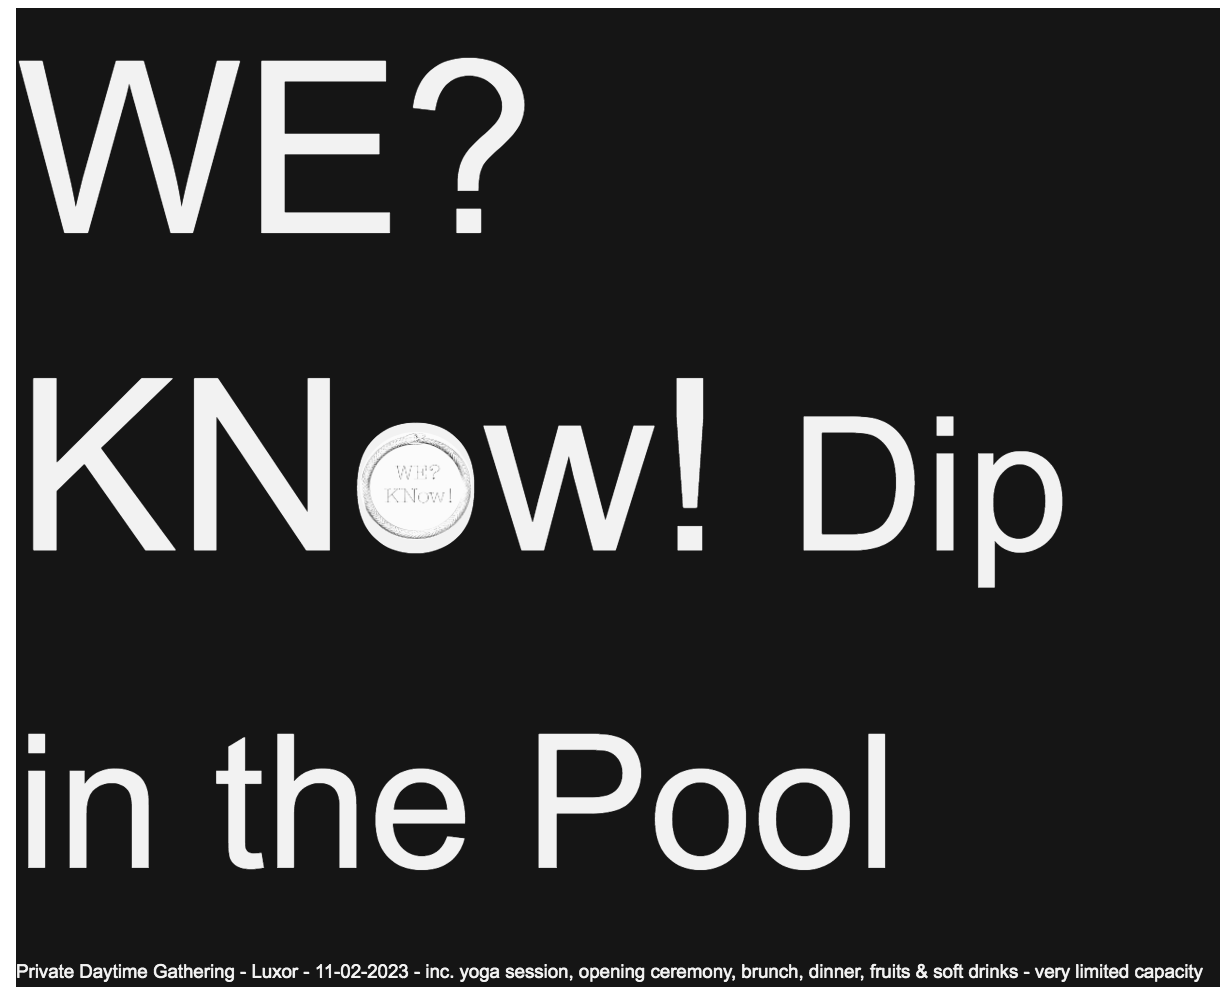 WE? KNow! dip in the Pool - フライヤー表